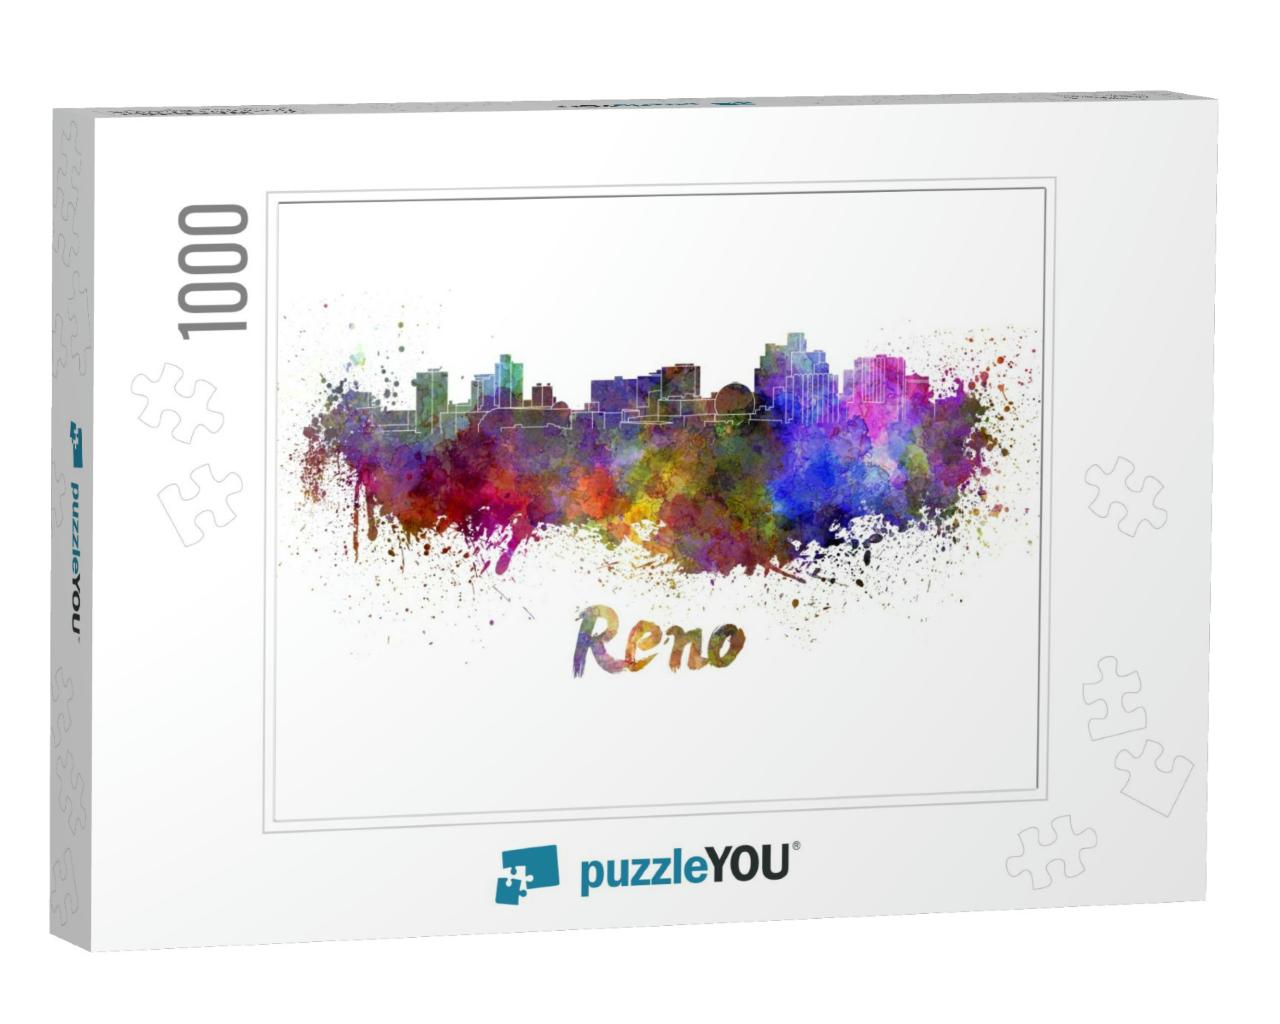 Reno Skyline in Watercolor Splatters with Clipping Path... Jigsaw Puzzle with 1000 pieces